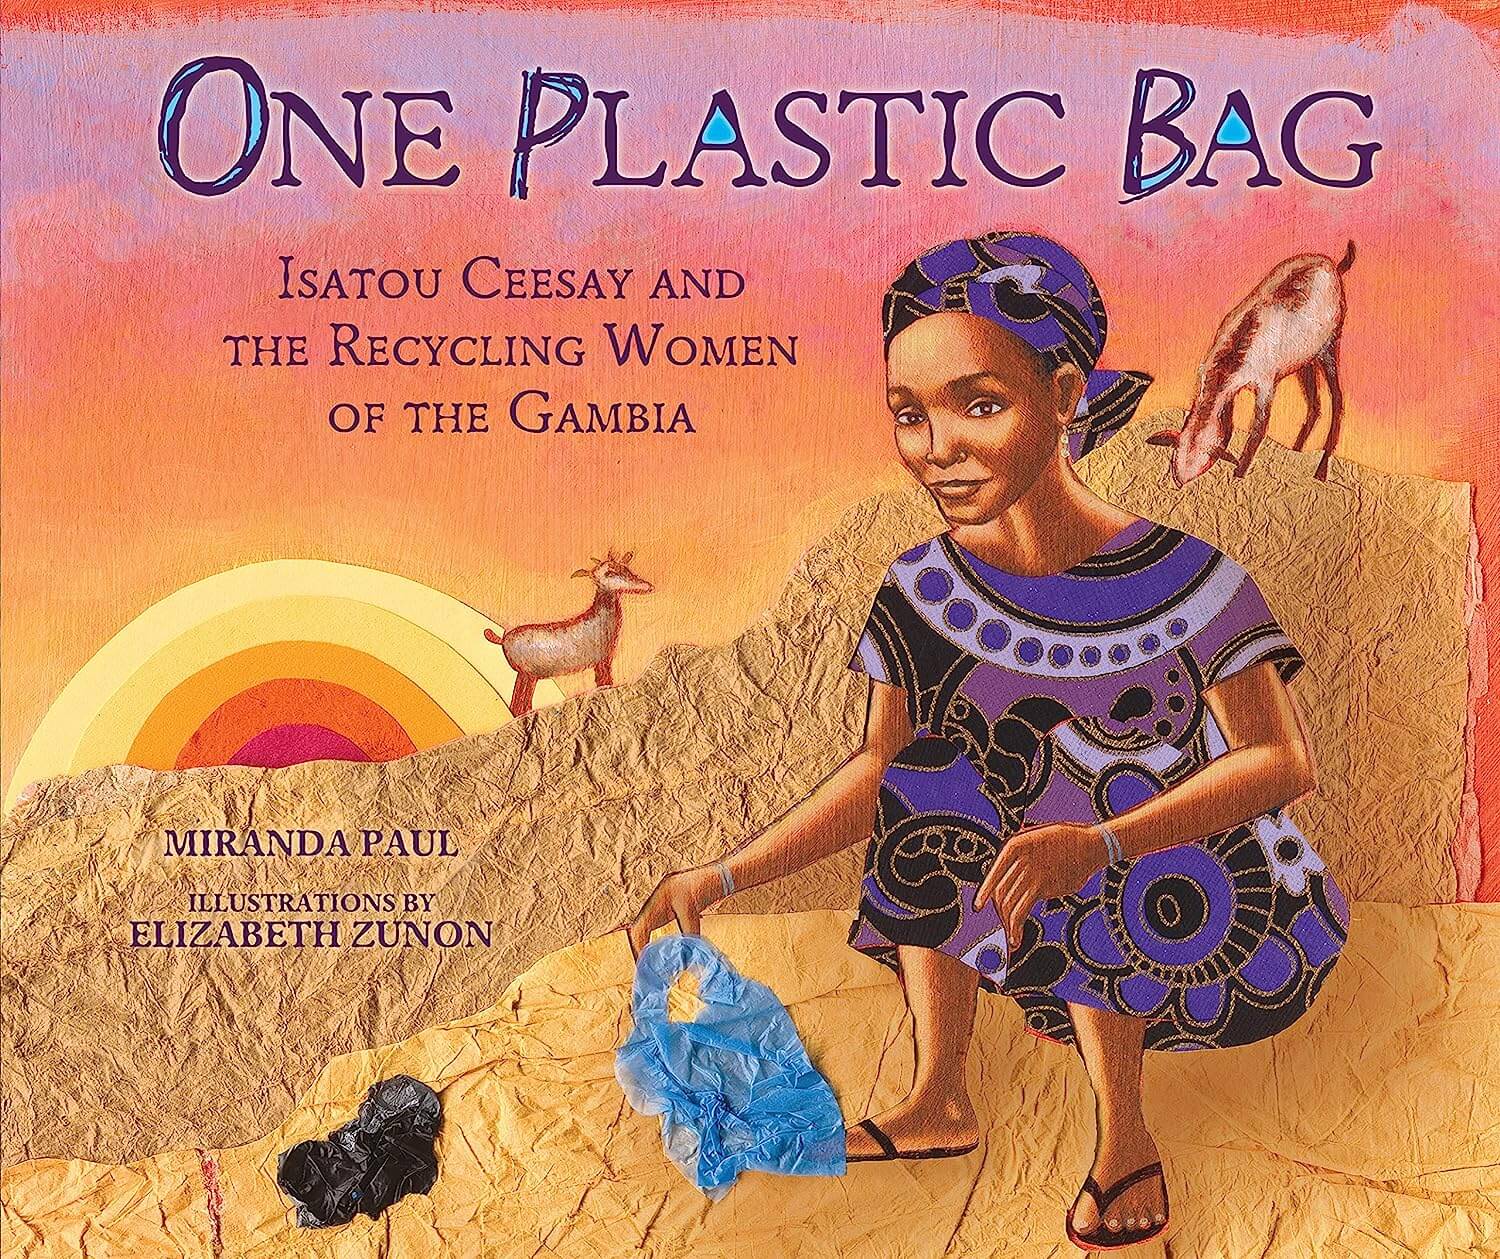 One plastic bag: Isatou Ceesay and the recycling women of the Gambia by Miranda Paul 